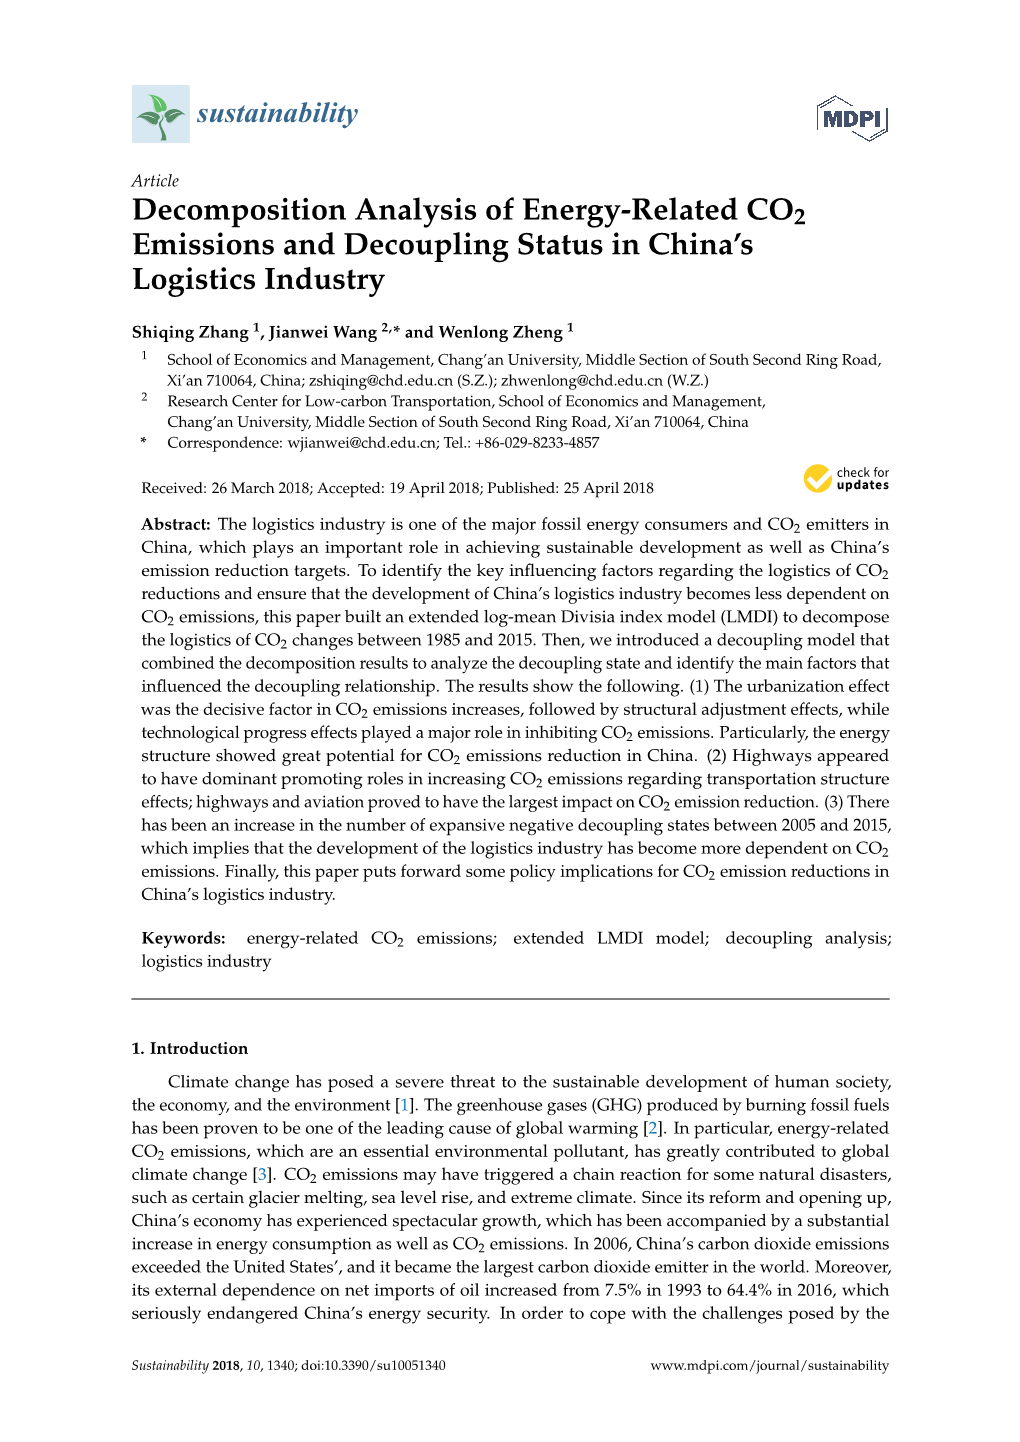 Decomposition Analysis of Energy-Related CO2 Emissions and Decoupling Status in China’S Logistics Industry